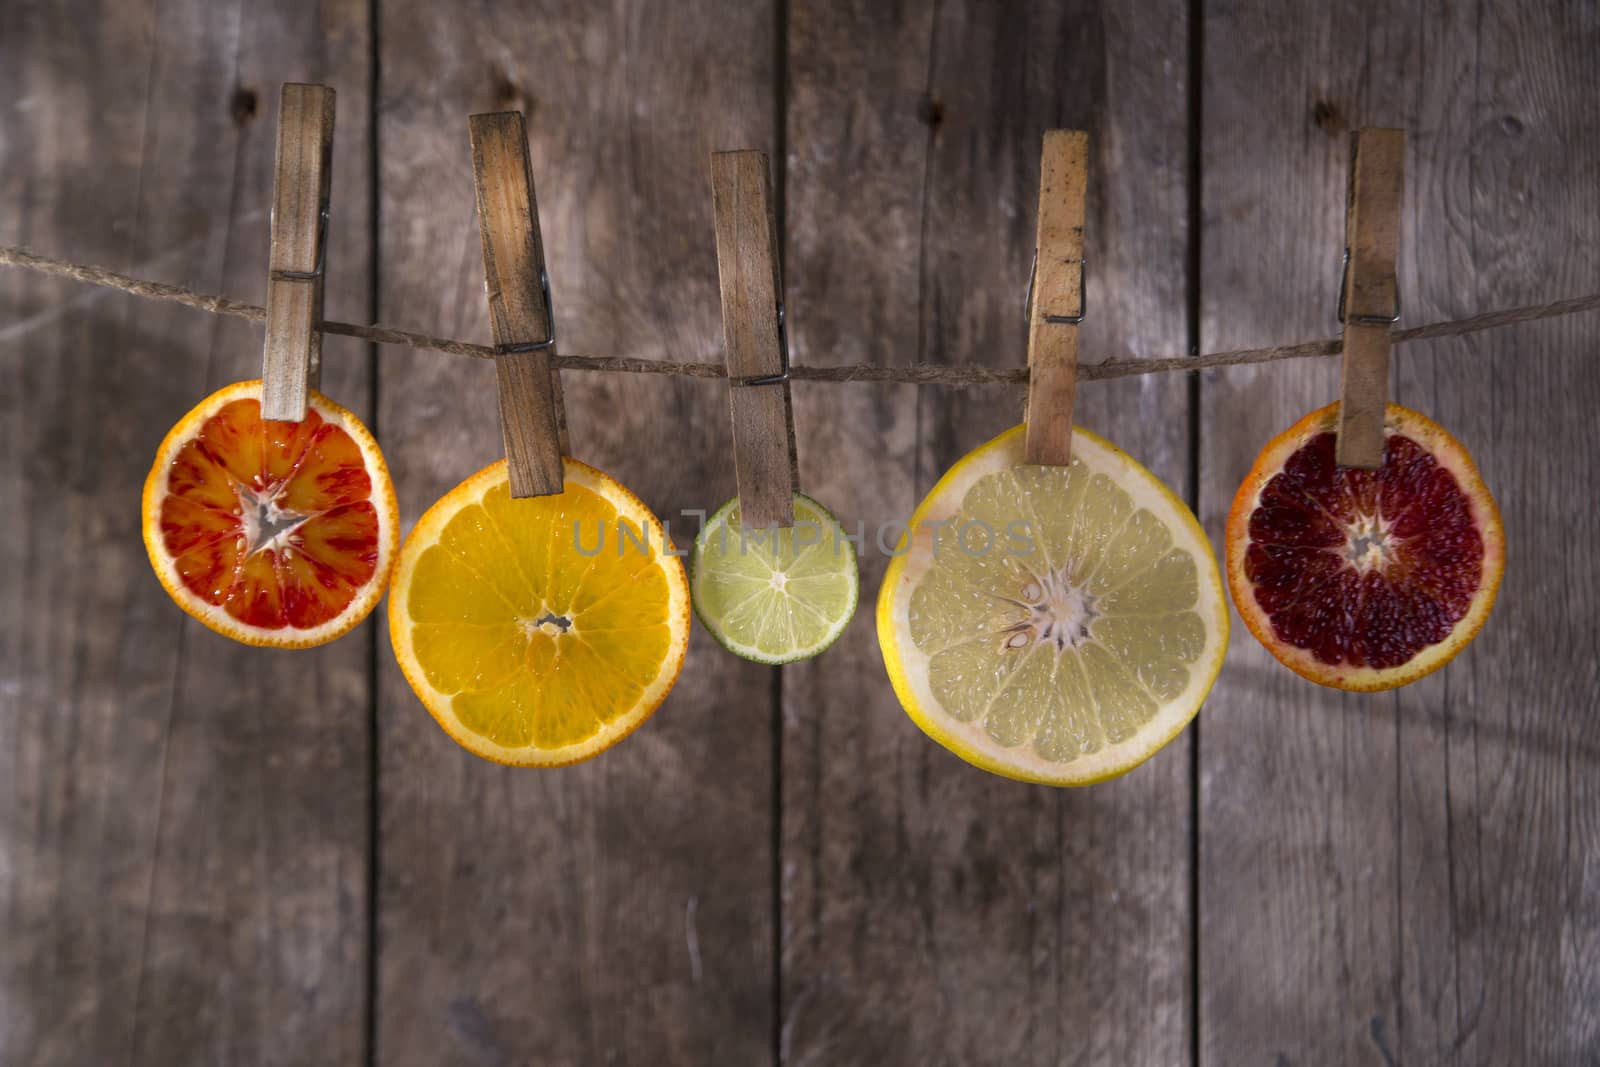 Presentation of a series of slices of citrus fruit to highlight the various colors